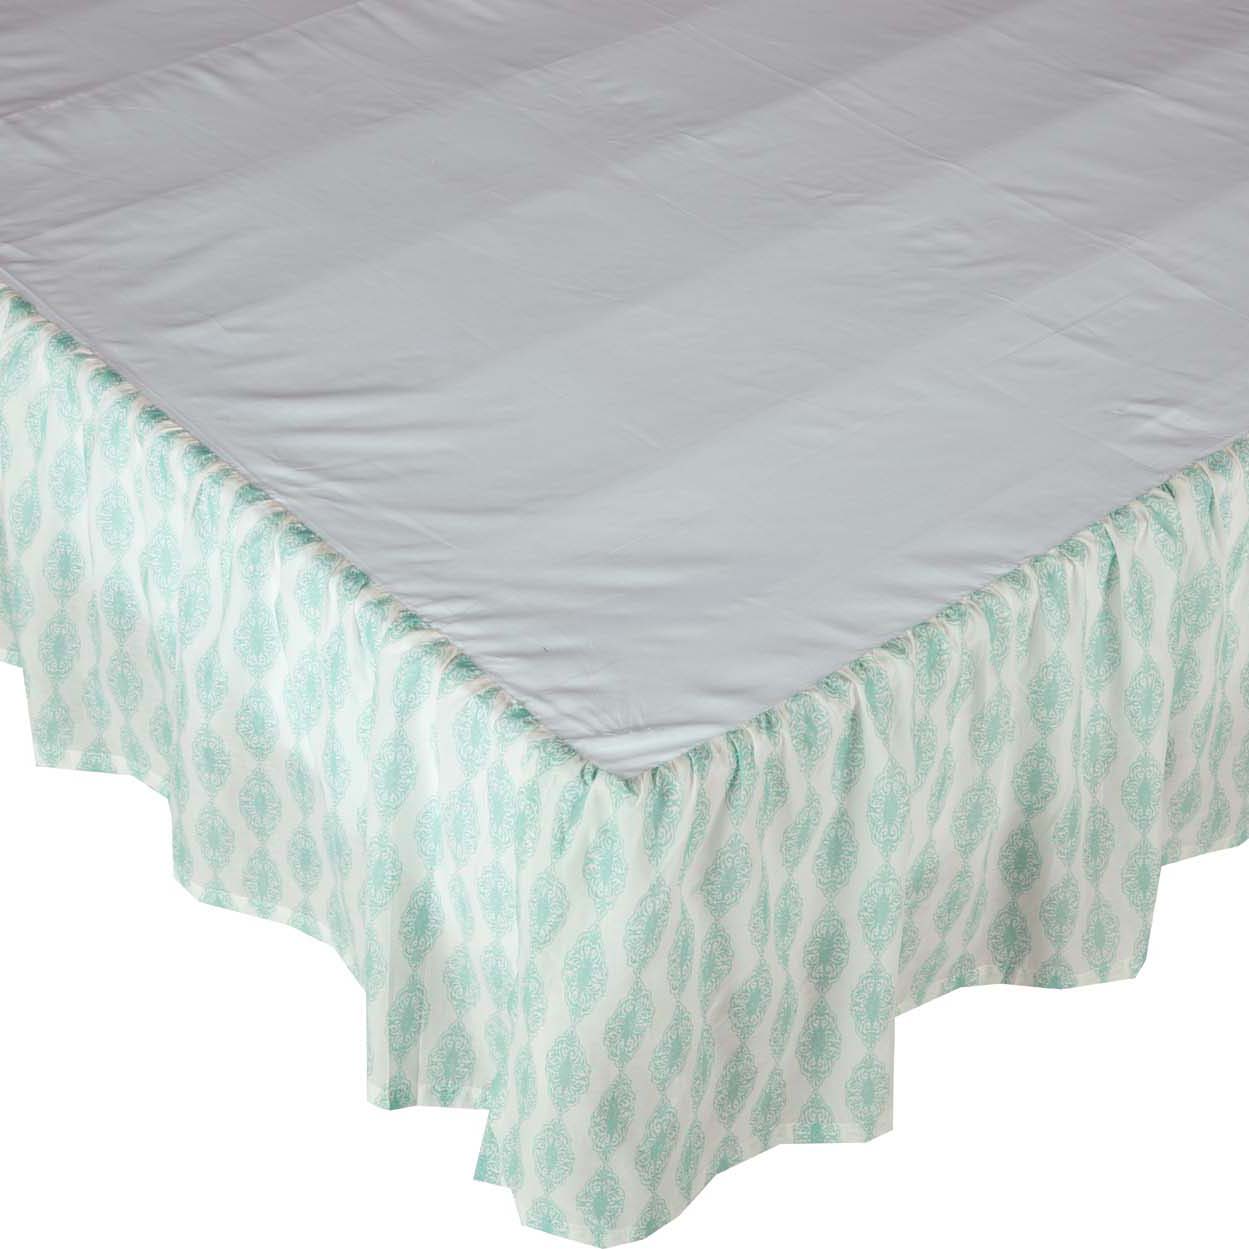 April & Olive Avani Sea Glass King Bed Skirt 78x80x16 By VHC Brands